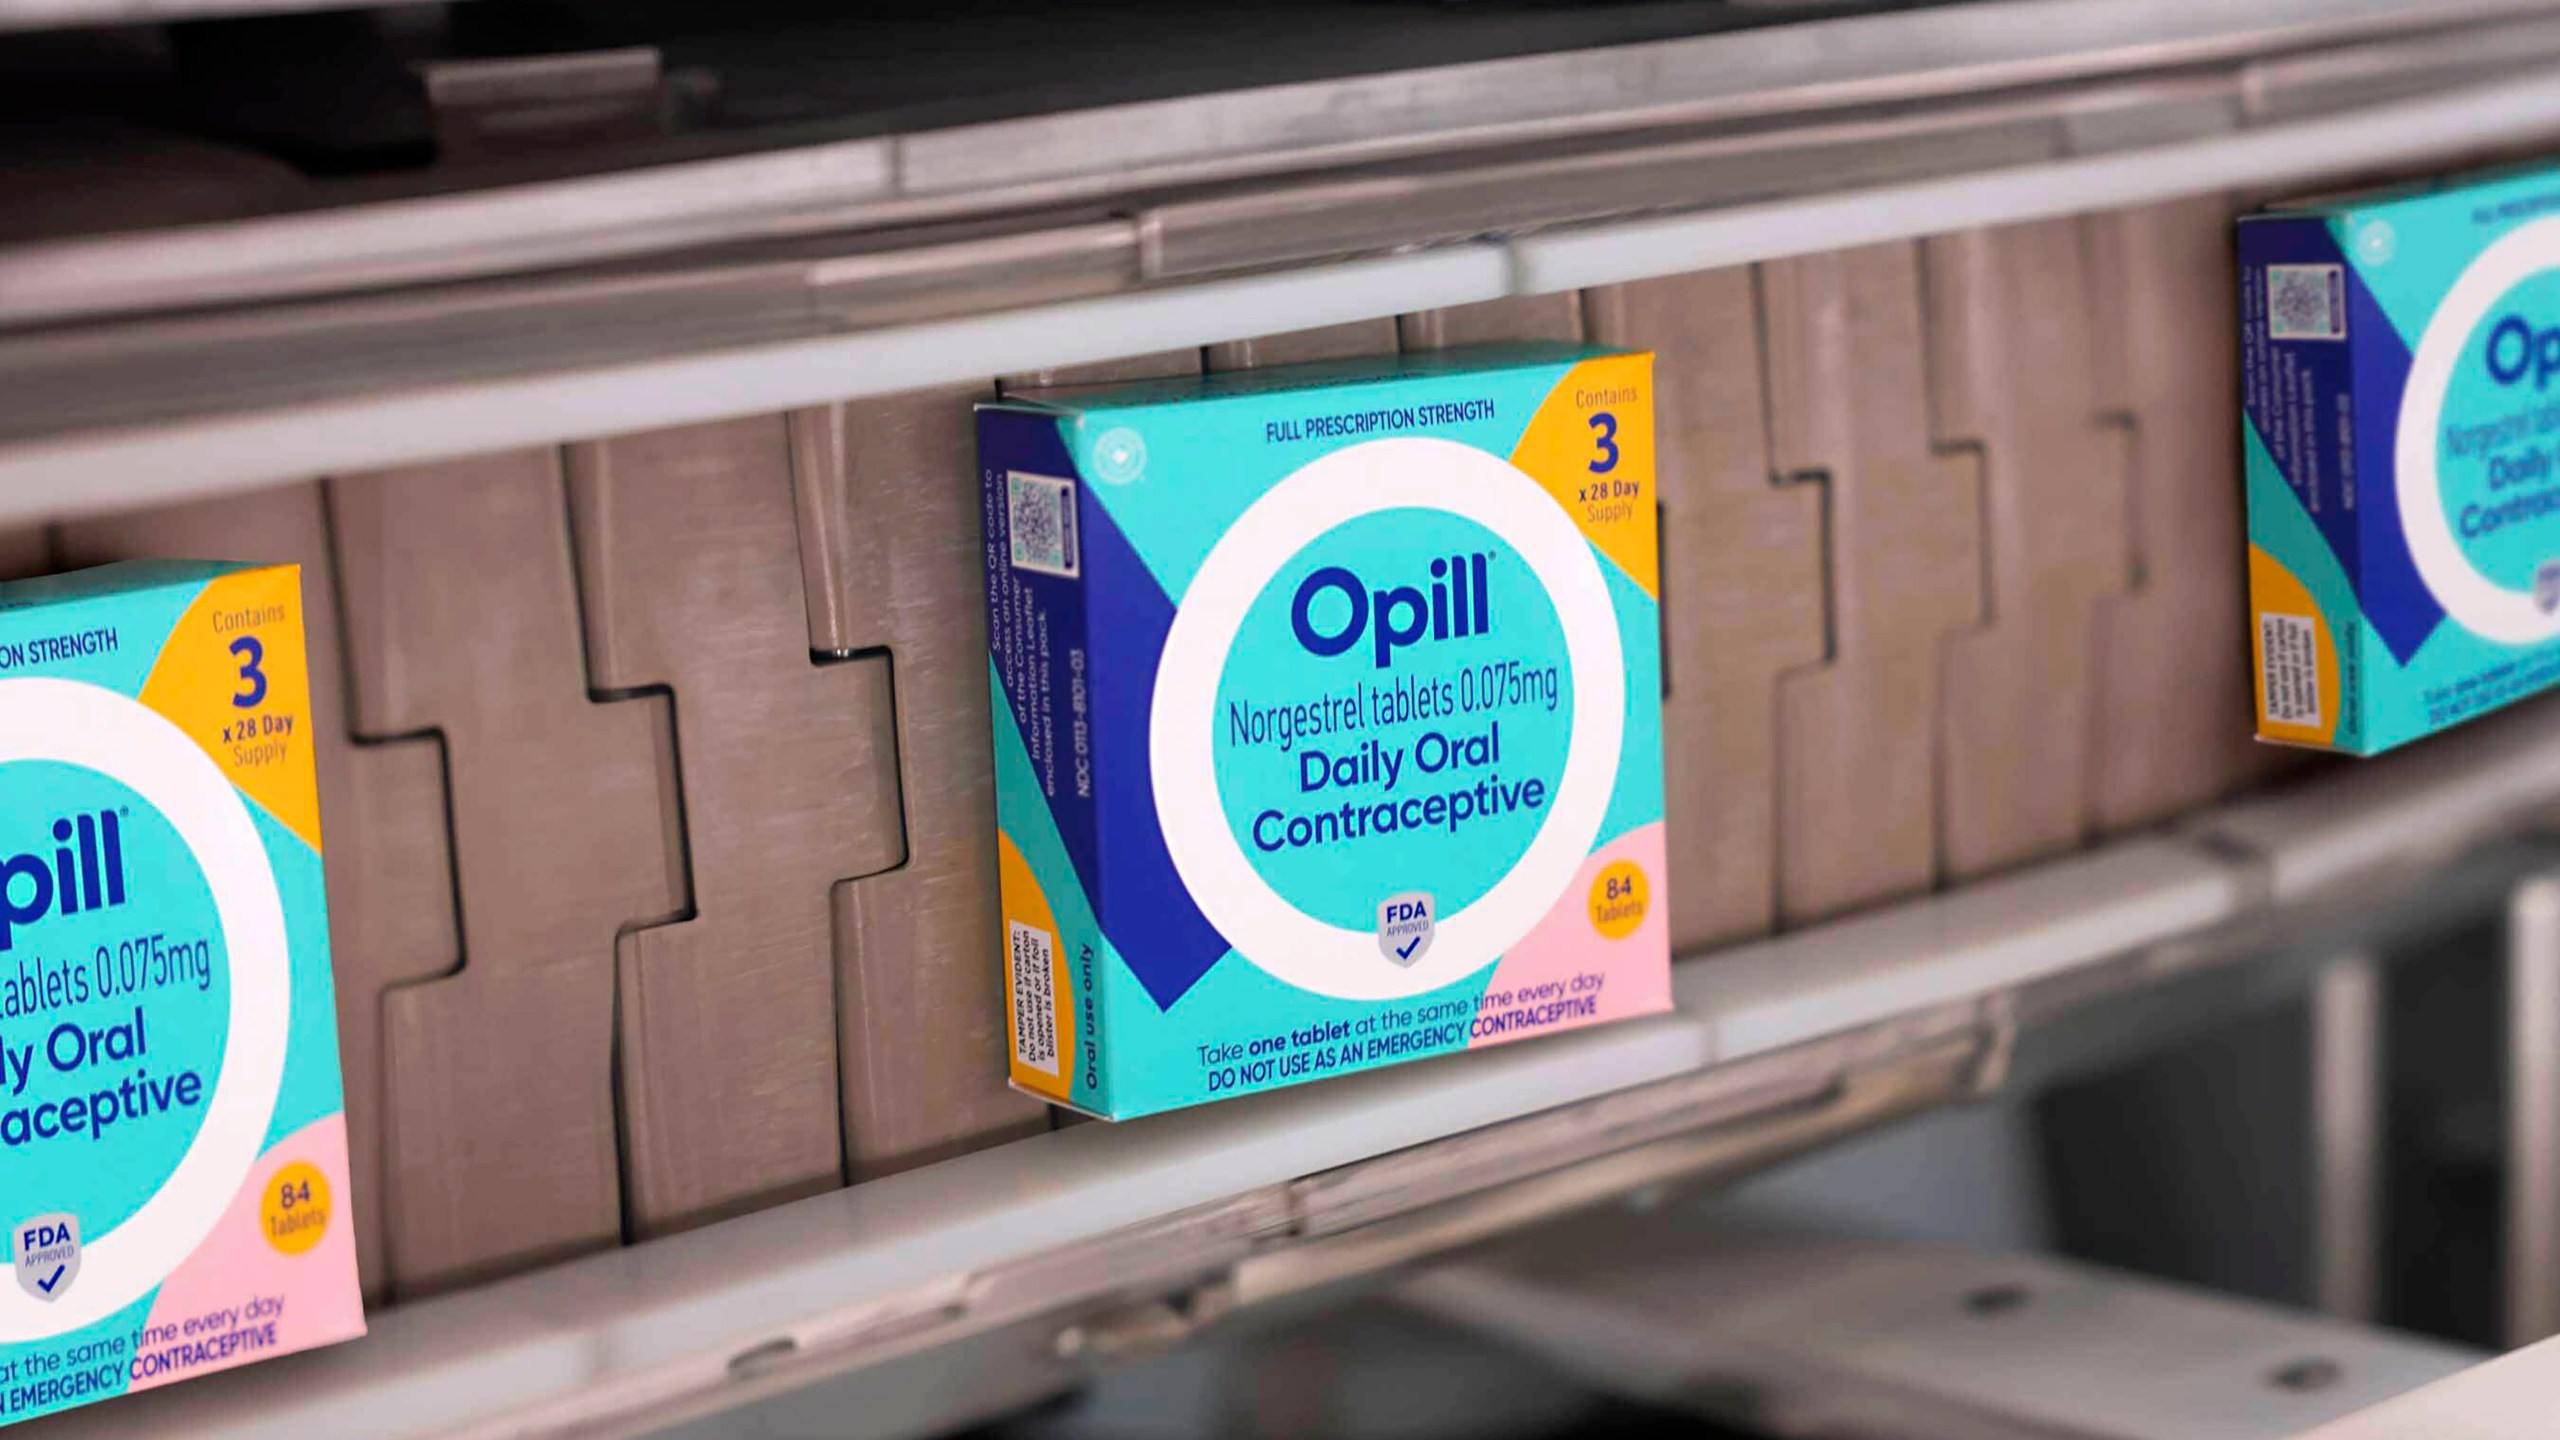 FILE - This undated photo provided by Perrigo Company shows boxes of Opill, the first over-the-counter birth control pill. Medicaid recipients in Wisconsin will have access to the first over-the-counter birth control pill starting Tuesday, March 19, 2024, allowing them to easily receive contraceptive medication with no out-of-pocket costs or doctor's prescription, Gov. Tony Evers announced. (Perrigo Company via AP, File)